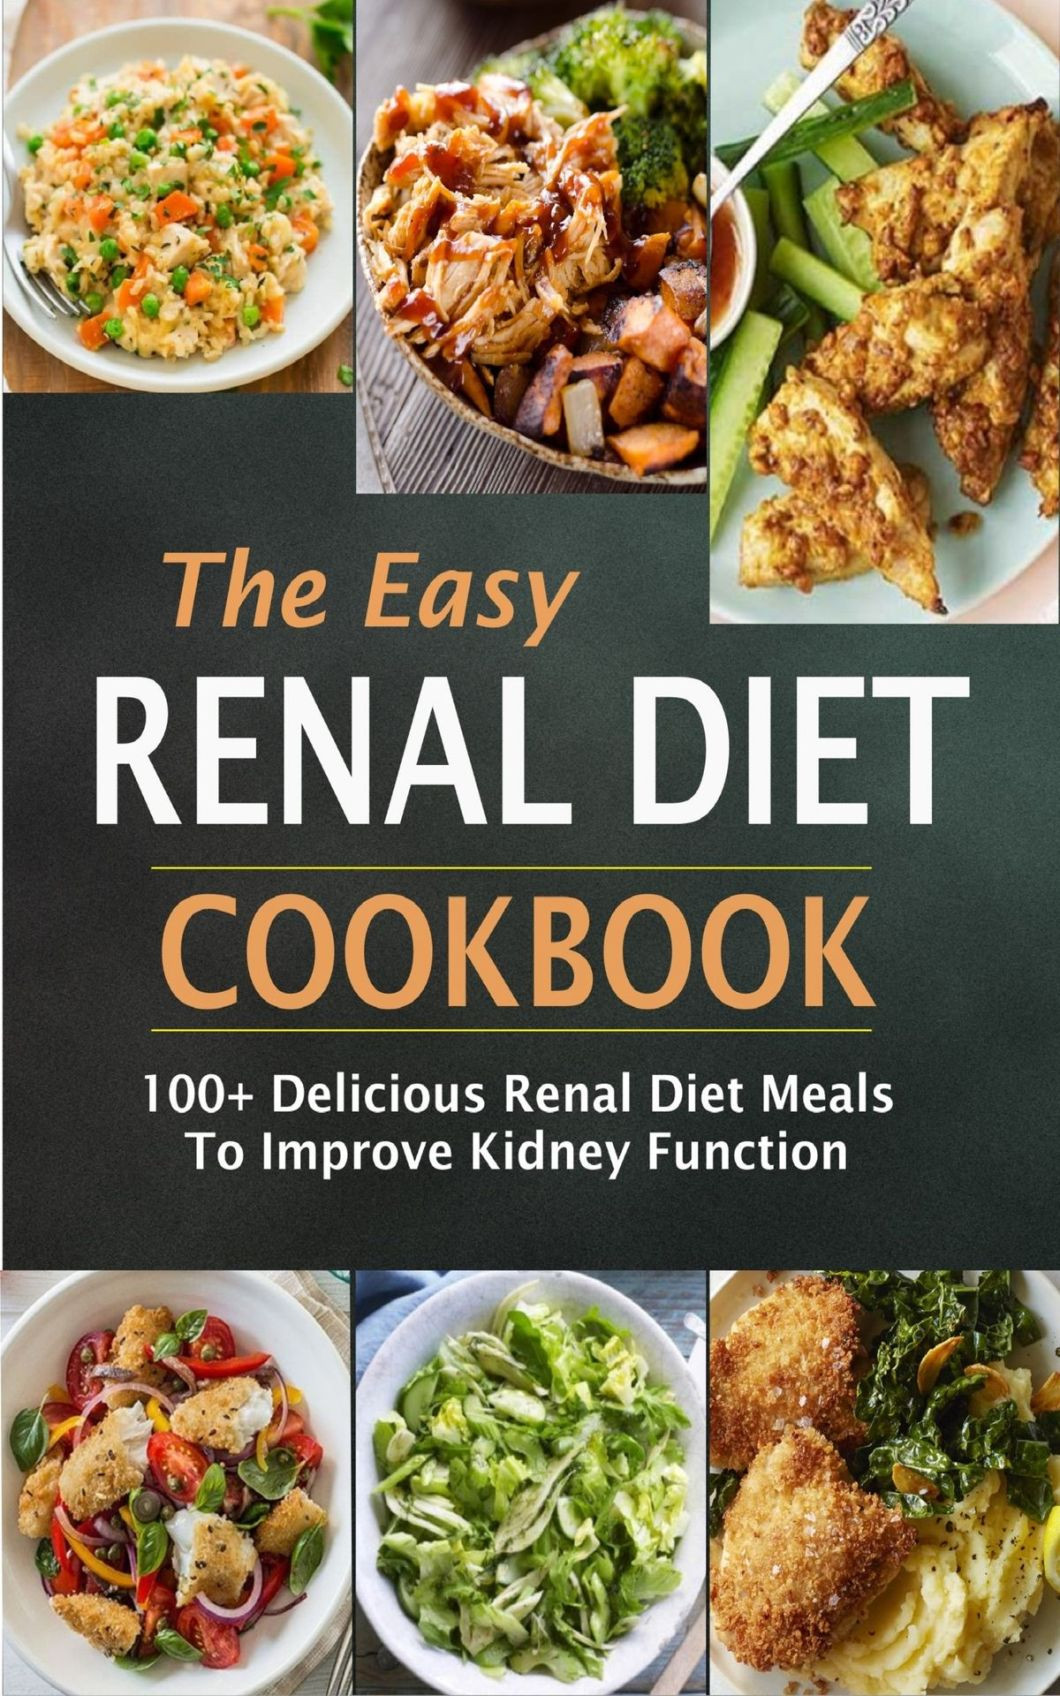 The Complete Cooking For Two Cookbook Pdf
 Dialysis Recipes And Renal Cookbooks